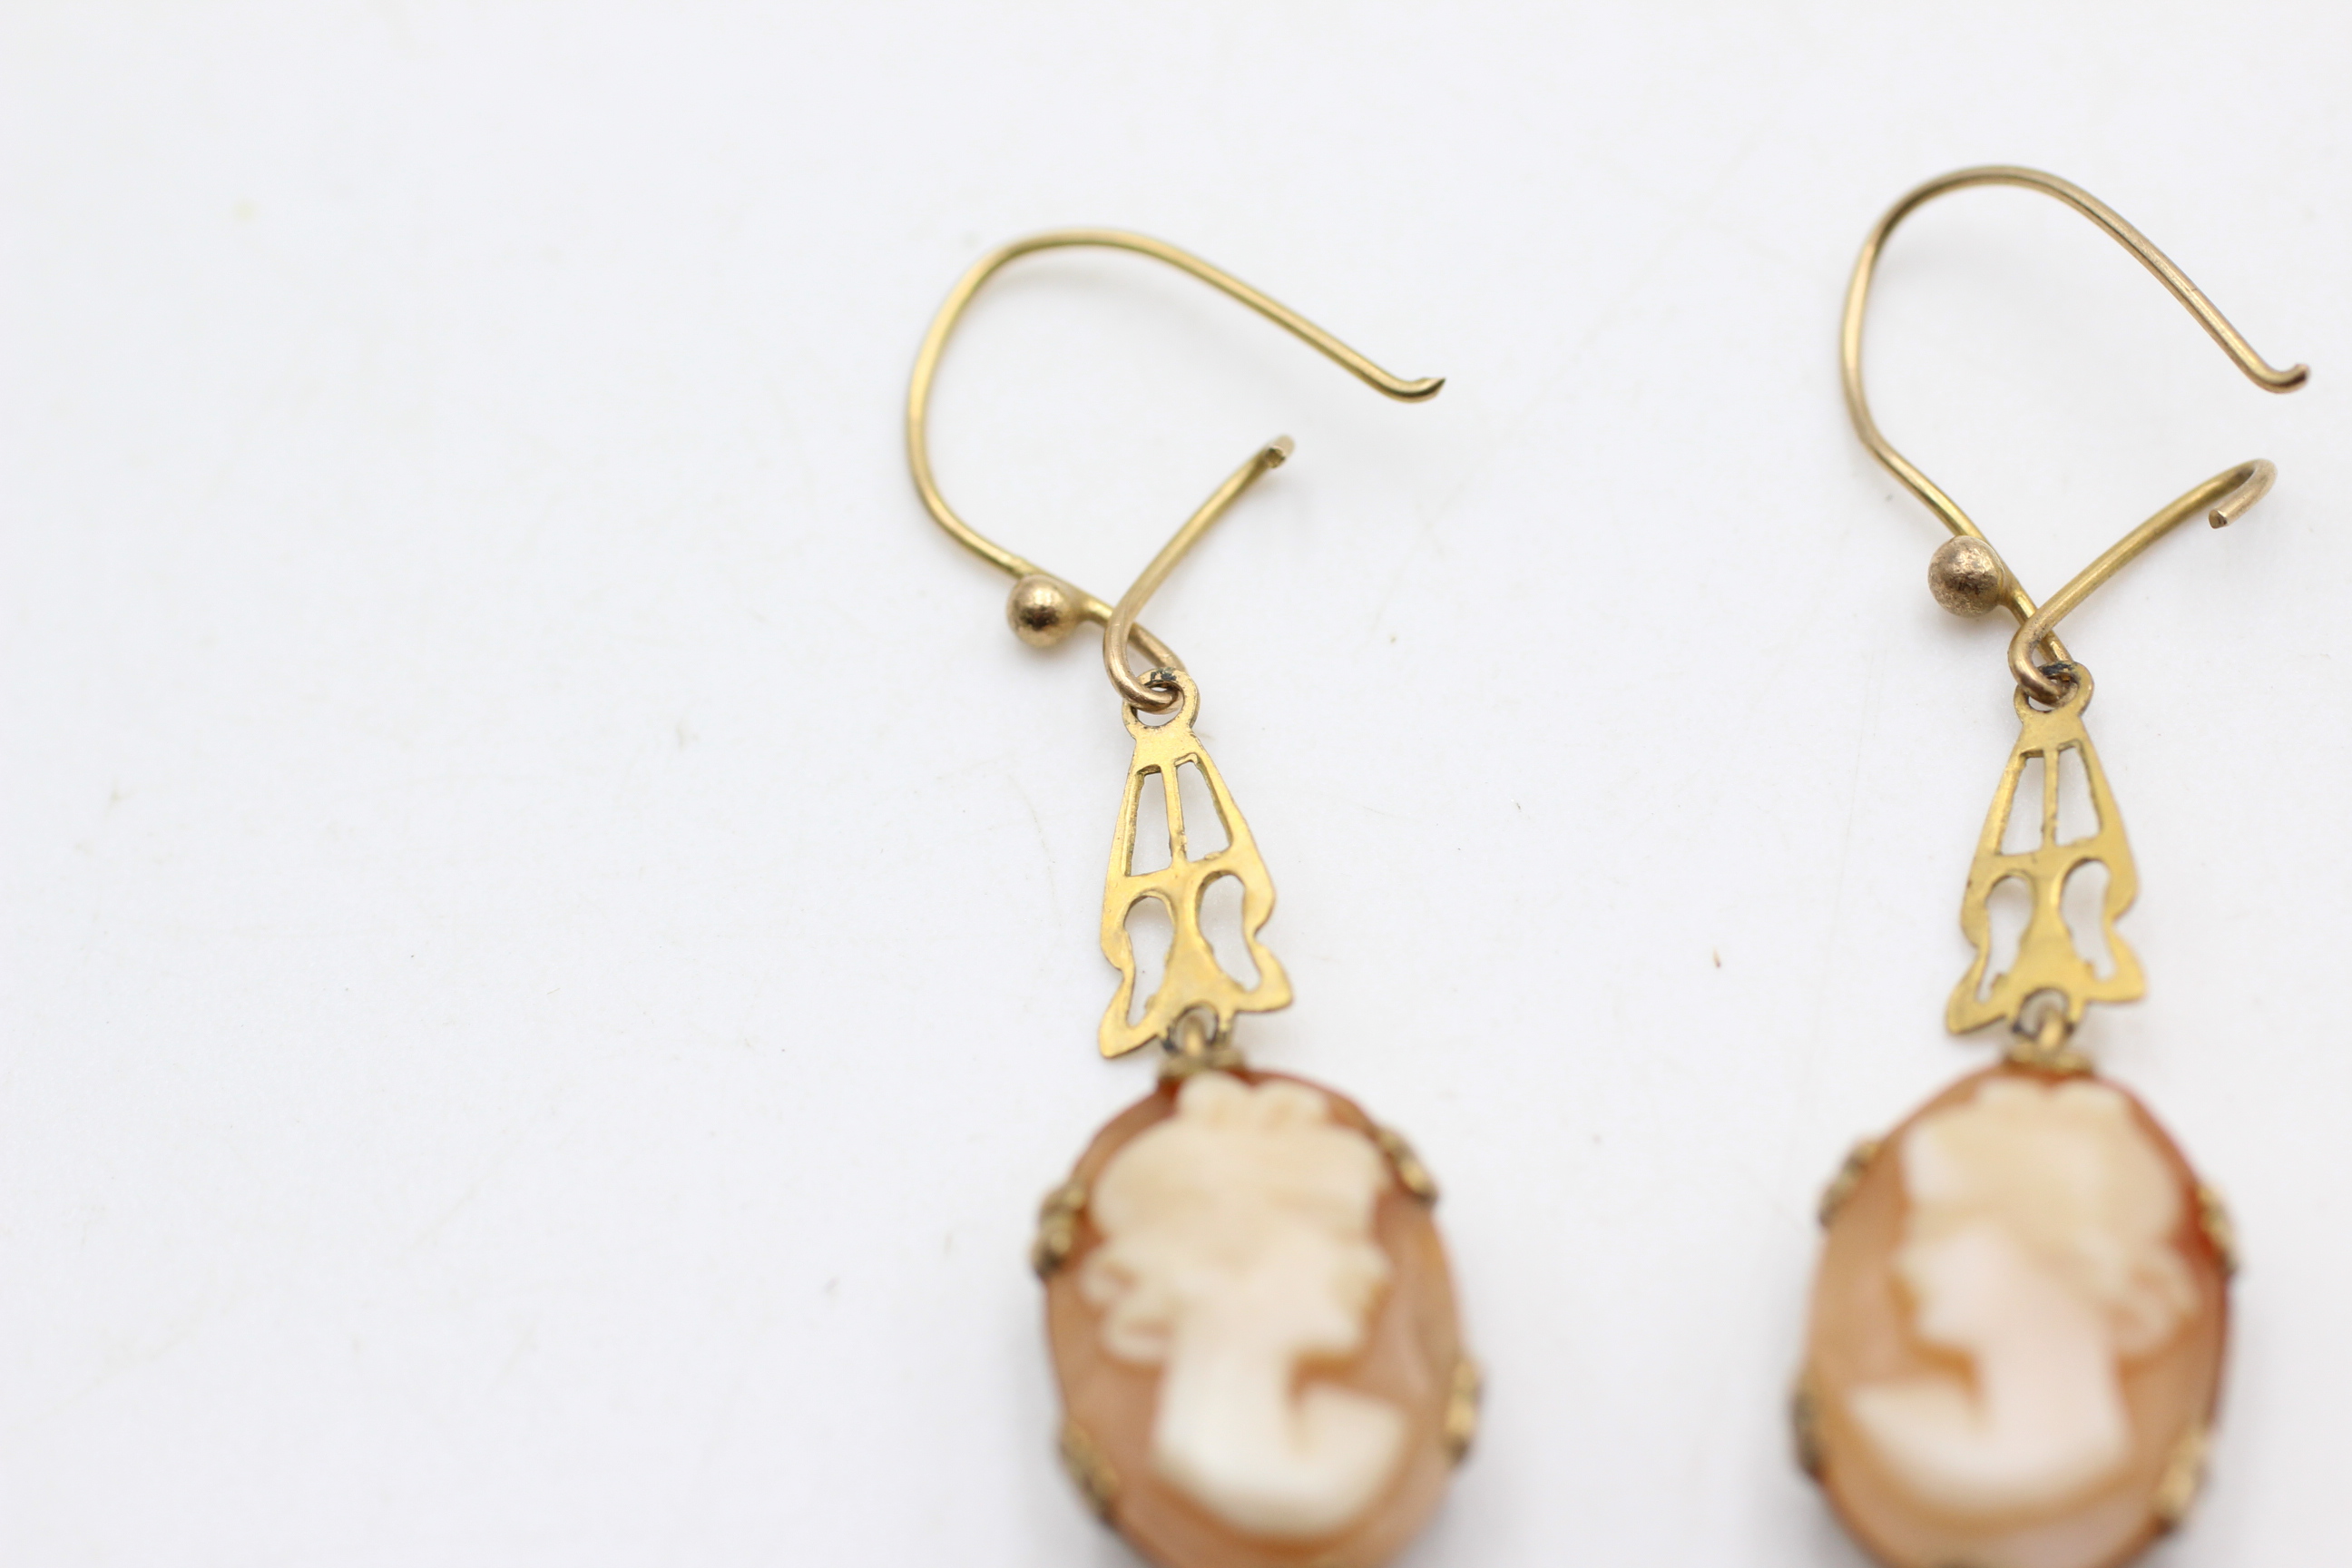 9ct gold vintage cameo drop earrings (2.8g) - Image 3 of 5